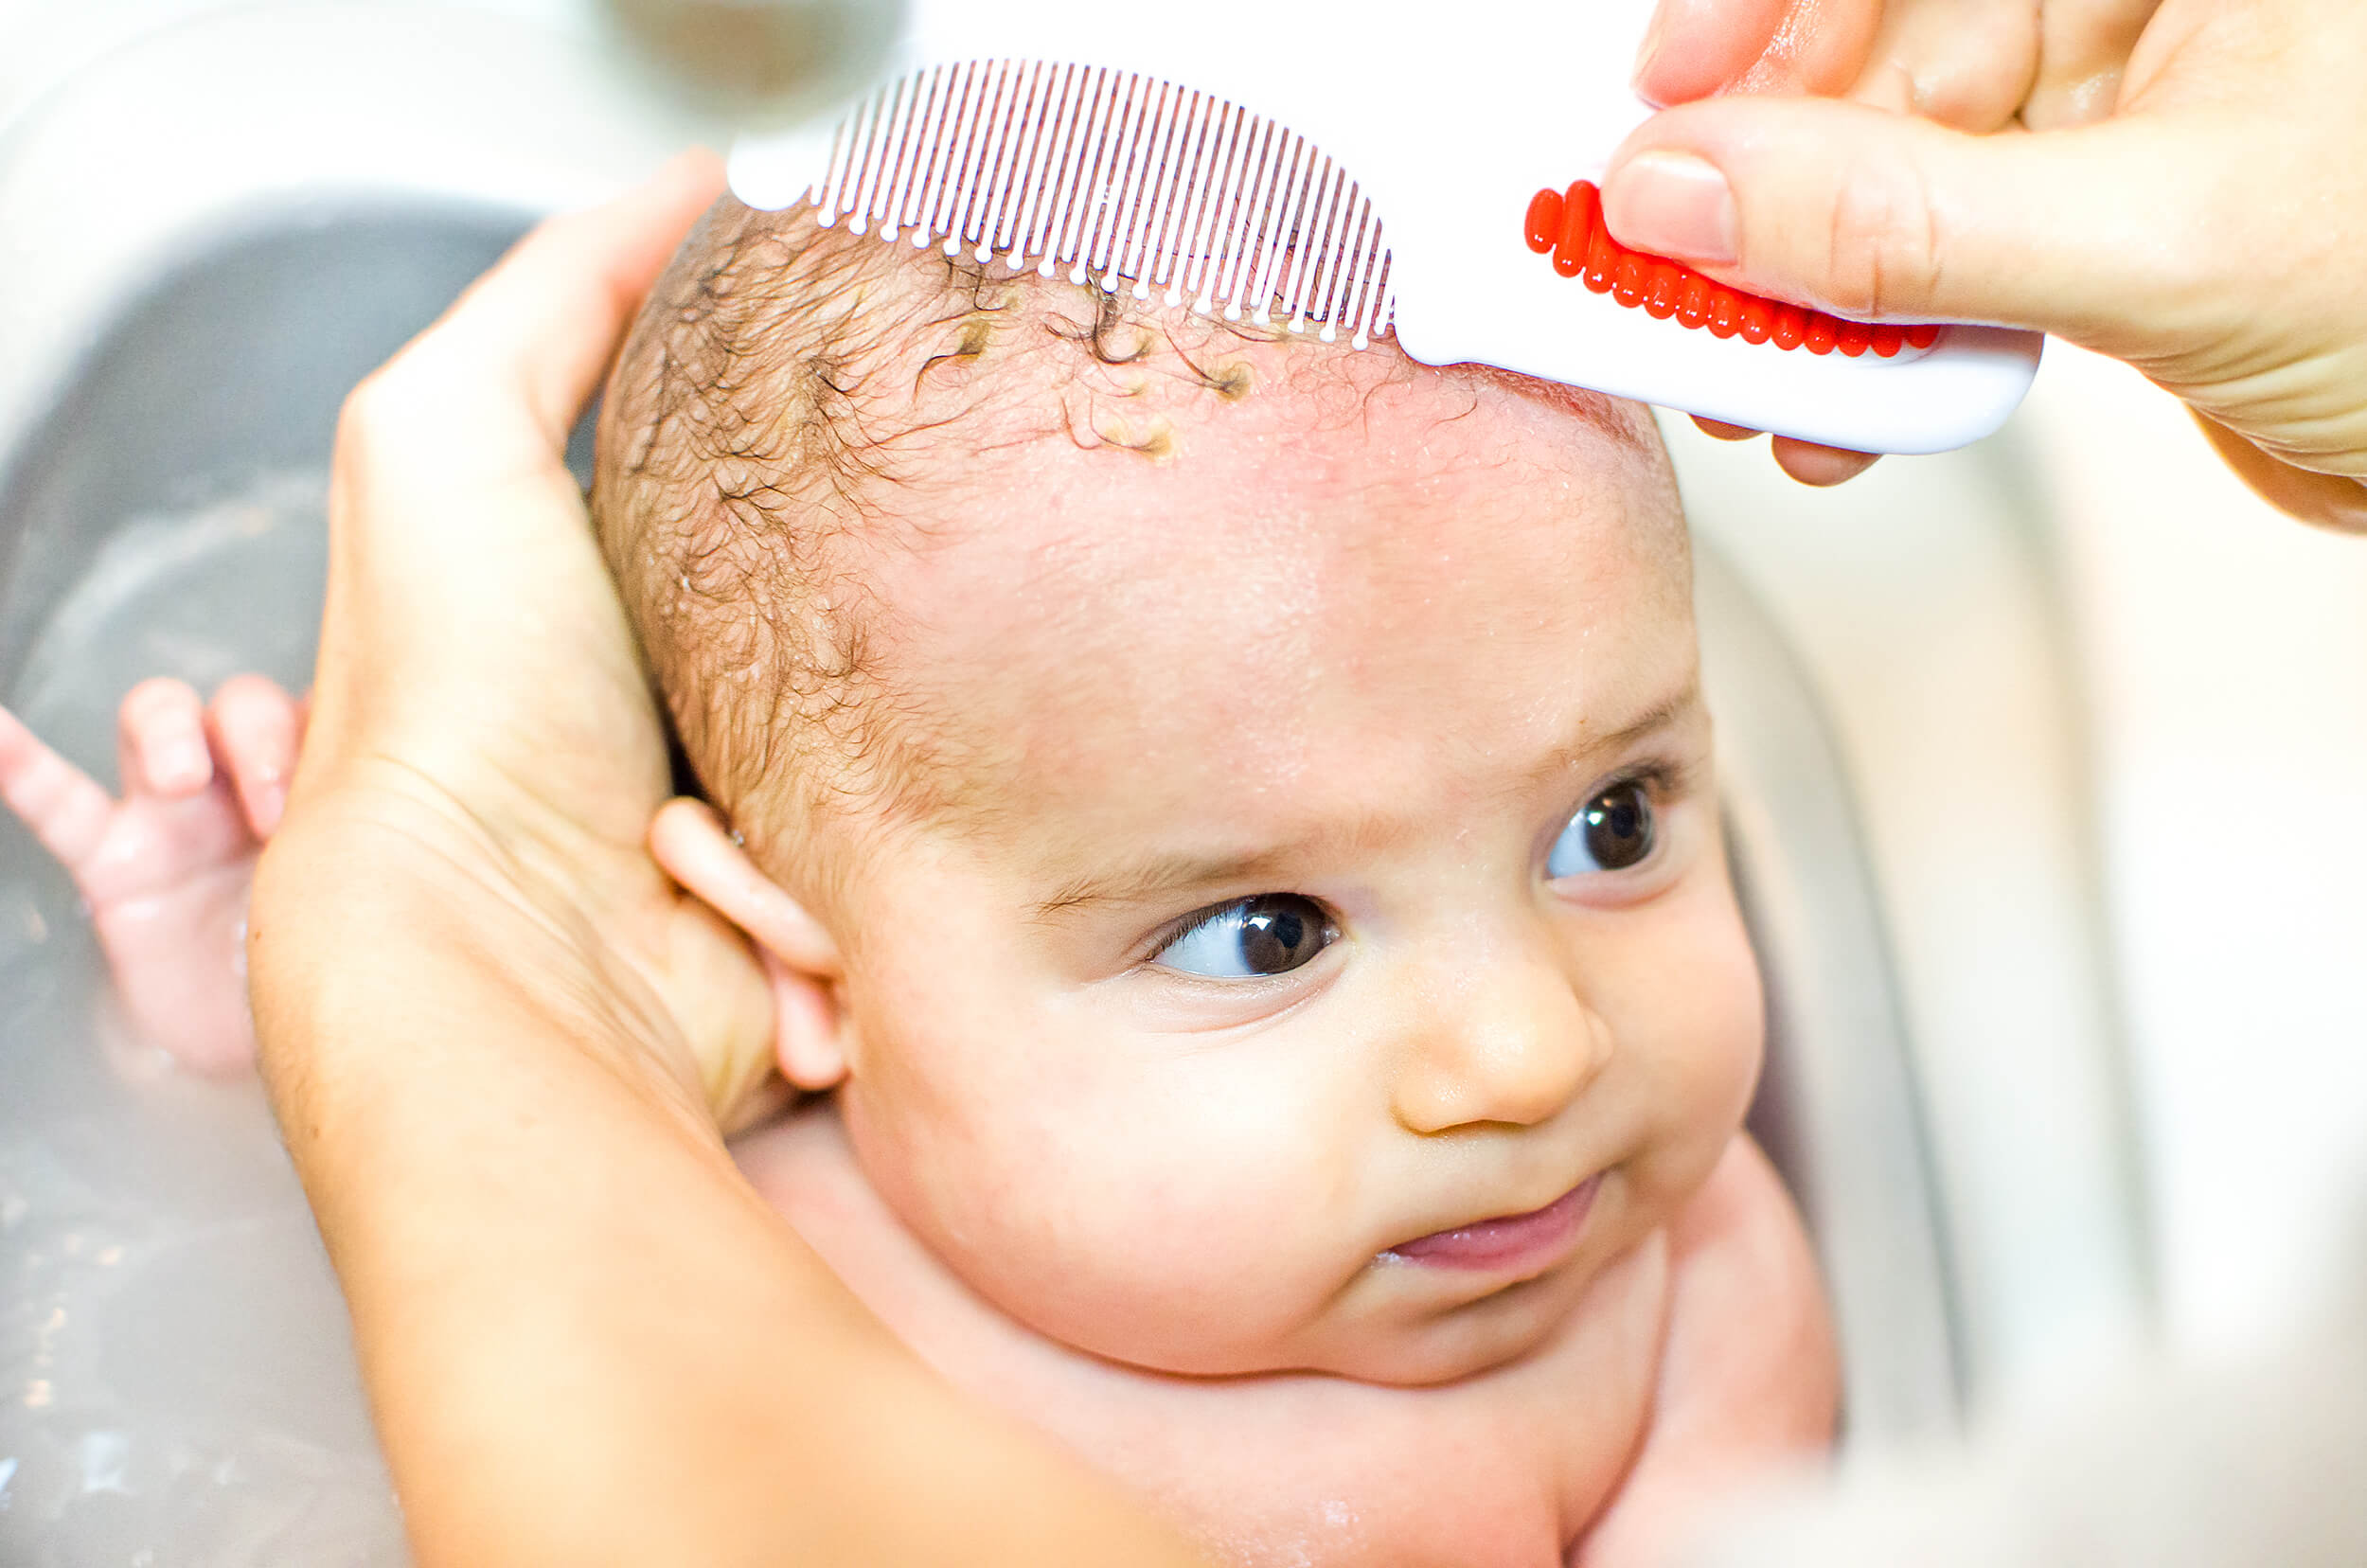 What Should Not Be Done For Cradle Cap In Infants_